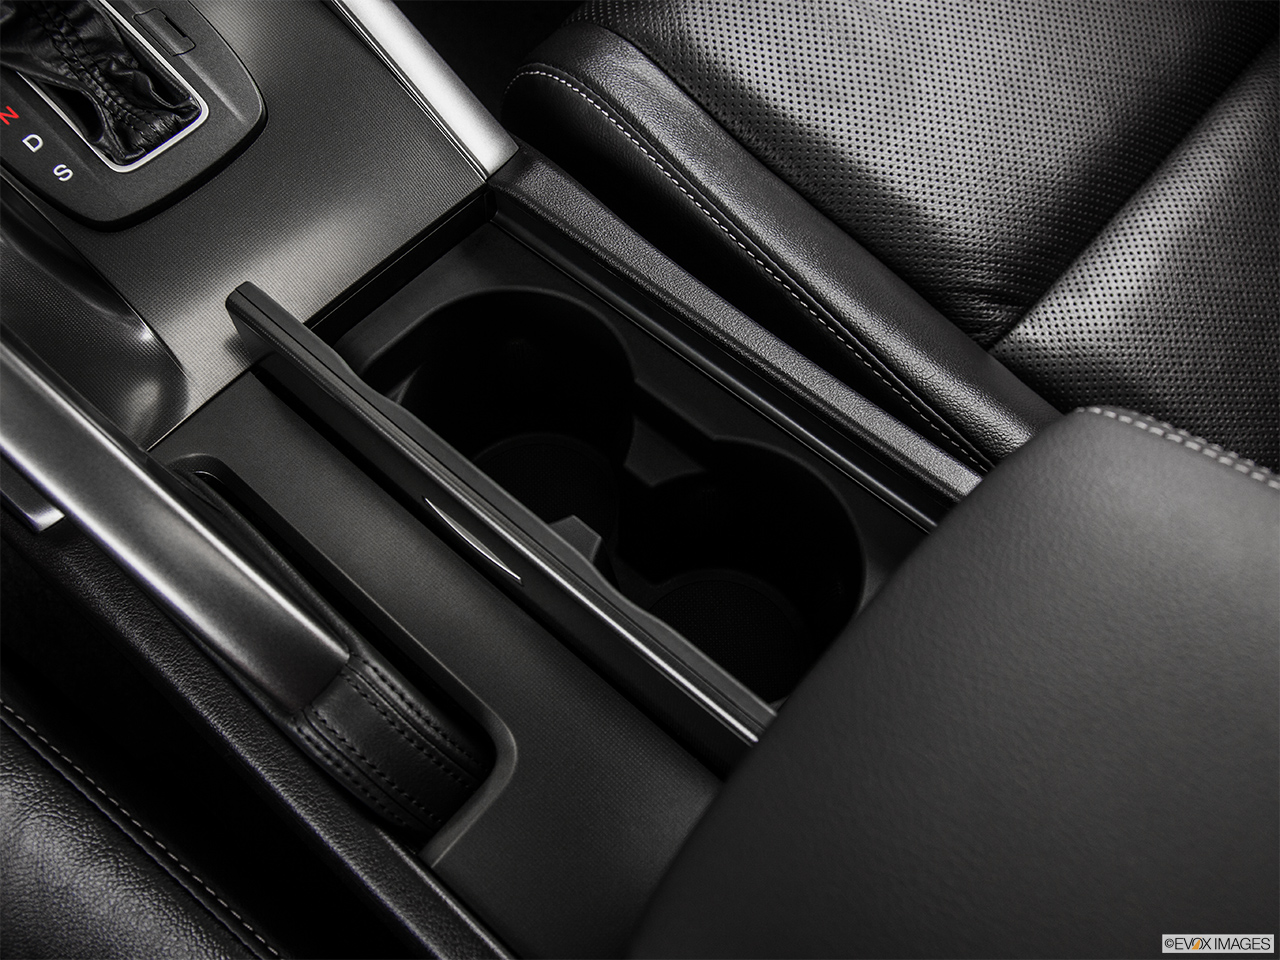 2014 Acura TSX 5-Speed Automatic Cup holders. 